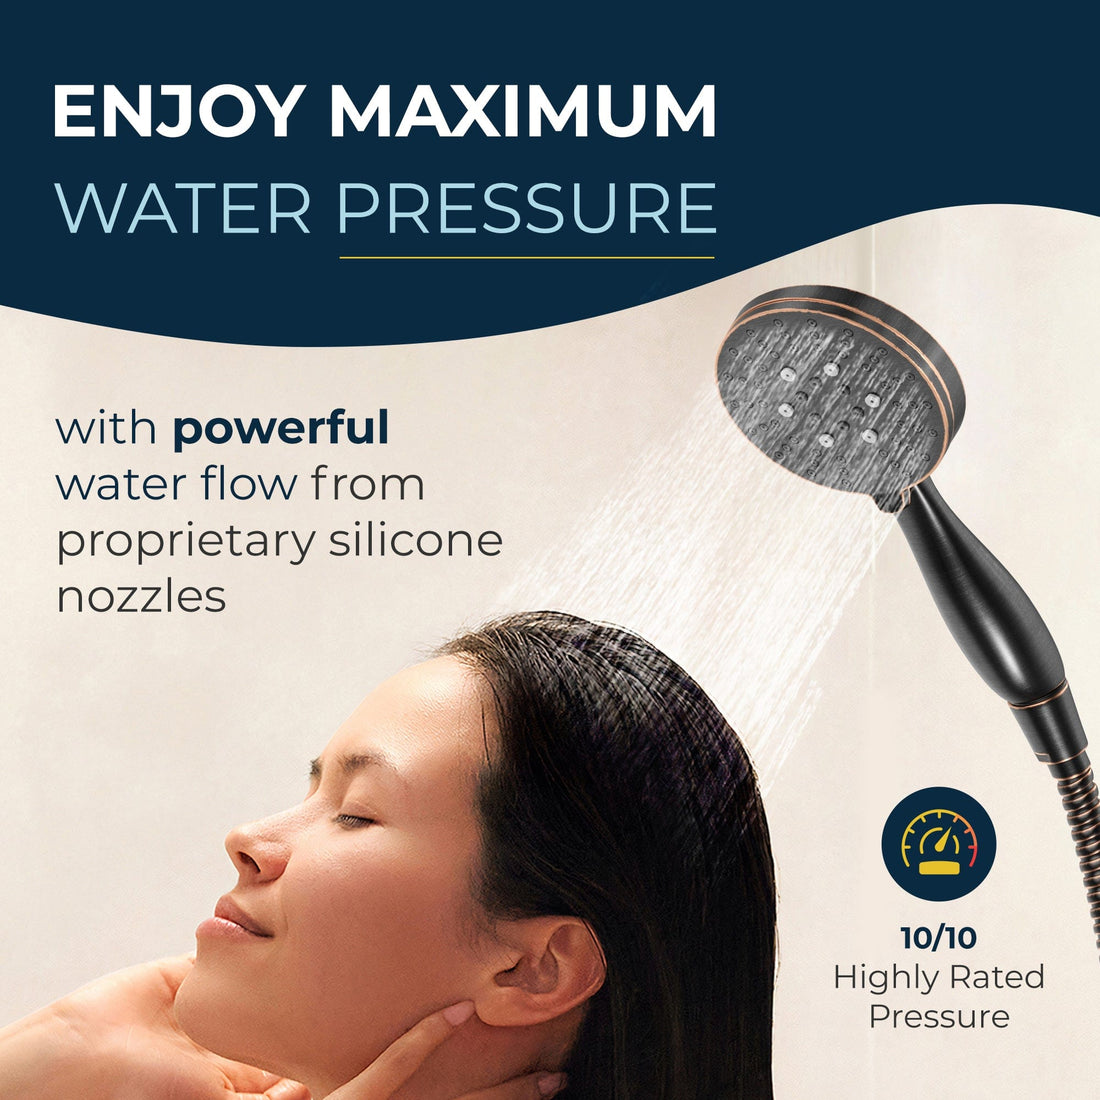 Maximum Pressure 3 Spray Settings for Handheld Shower Head Massage Wide and Mist Spray 2.5 / Oil Rubbed Bronze - The Shower Head Store